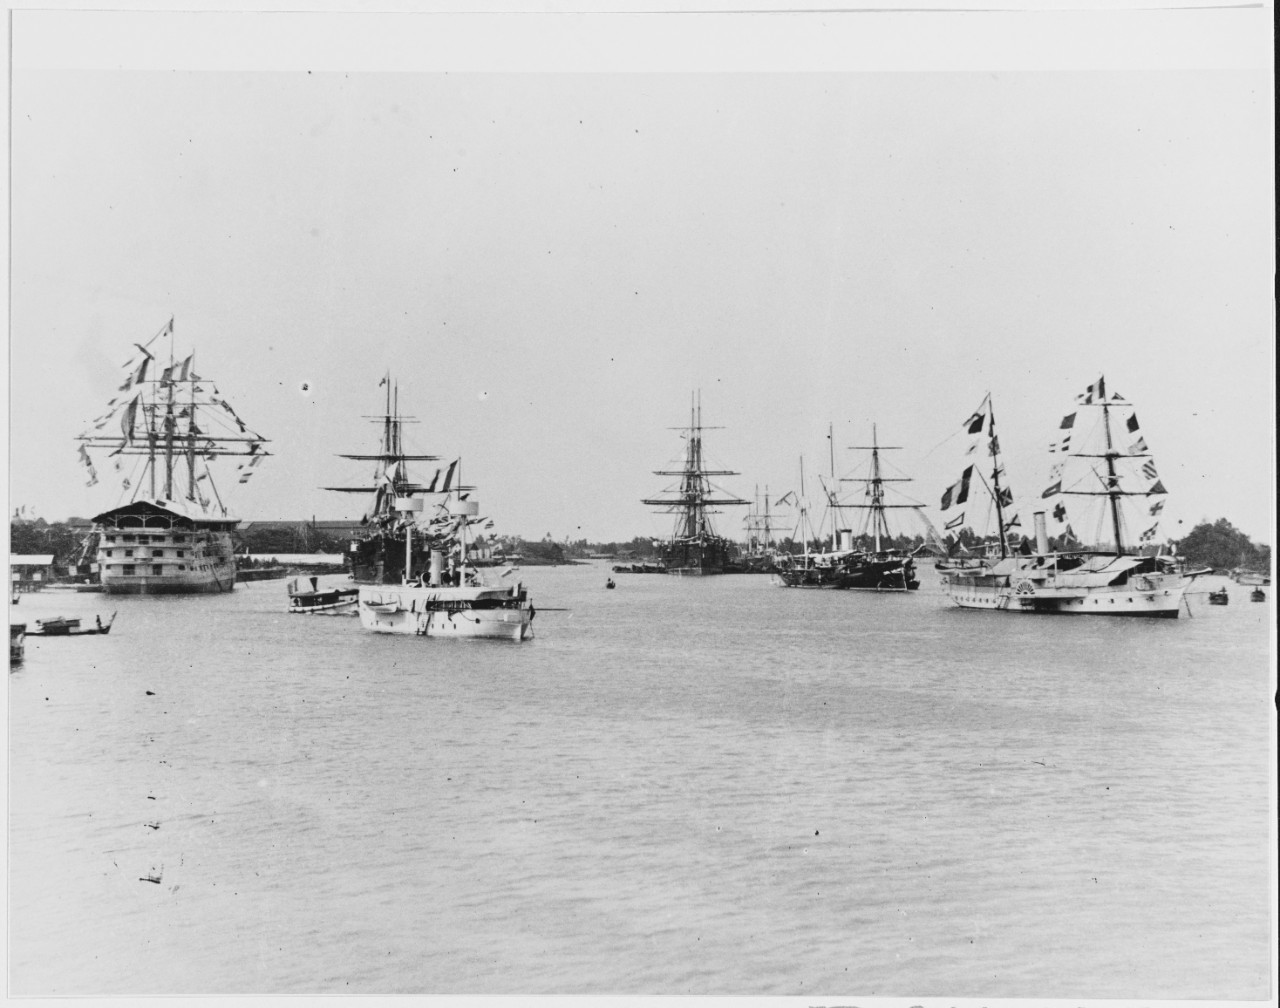 Warships at Saigon, French Indochina, about the late 1880's.